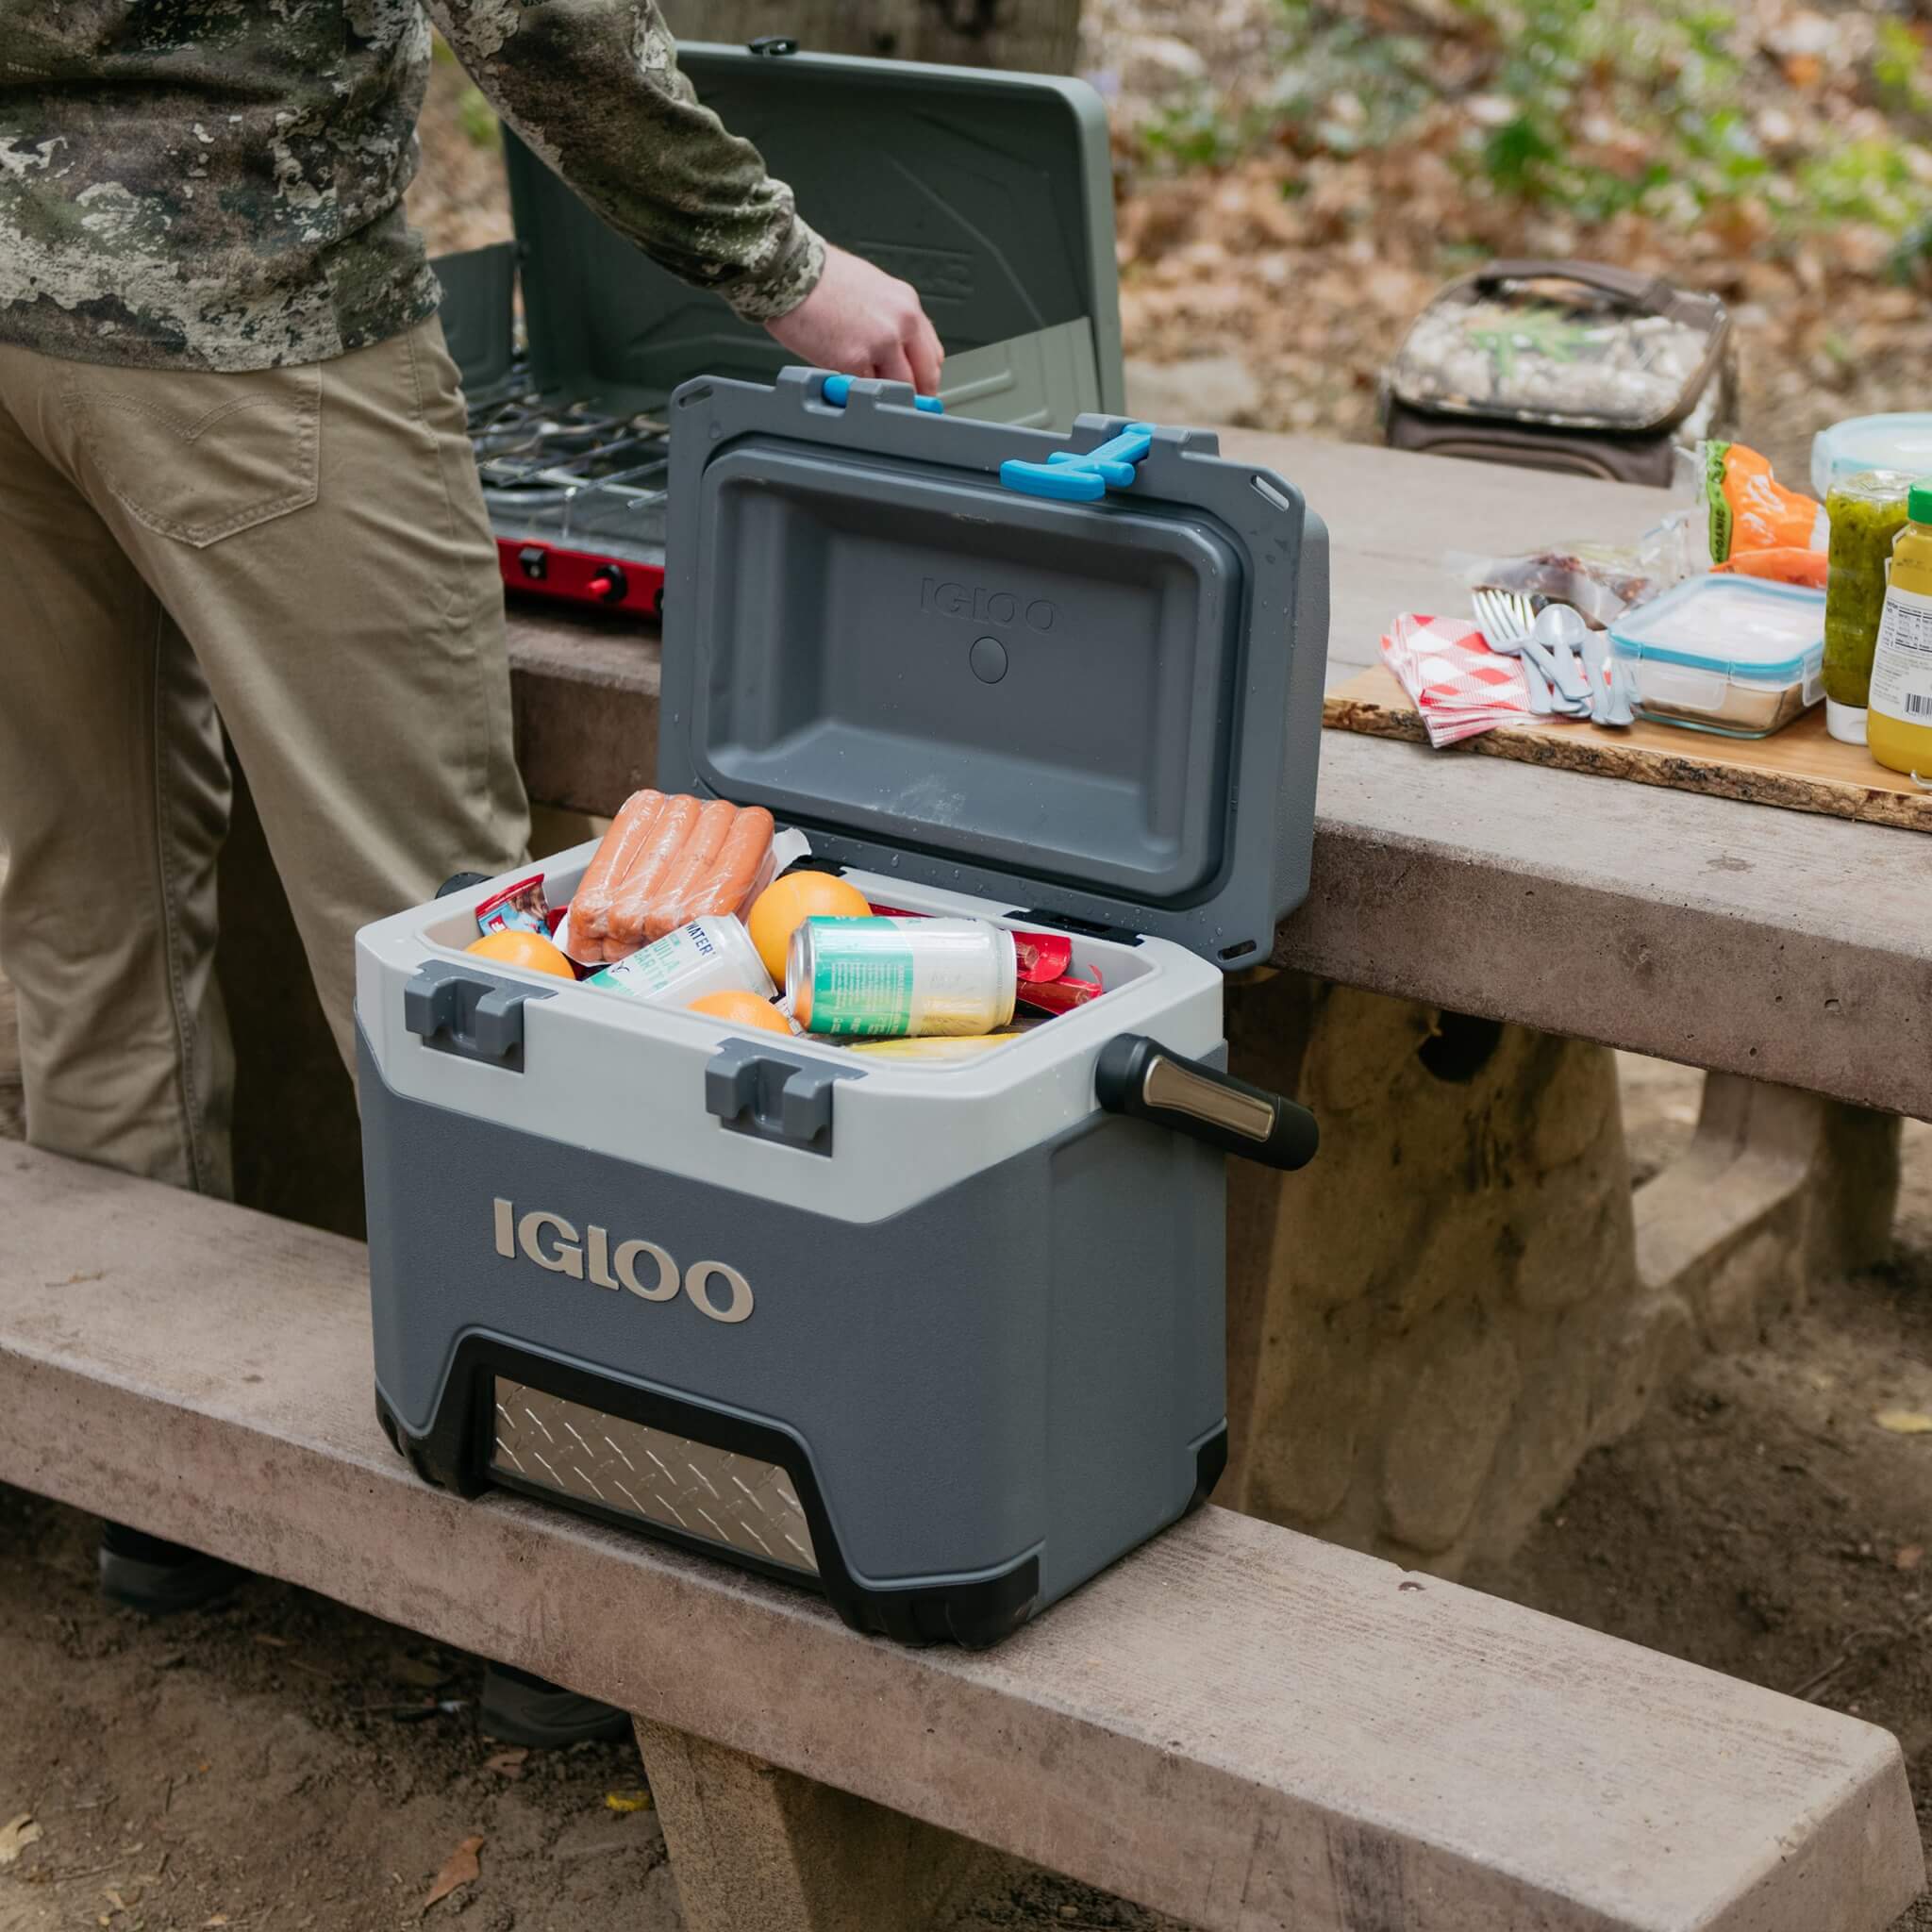 Igloo Coolers Review - Must Read This Before Buying